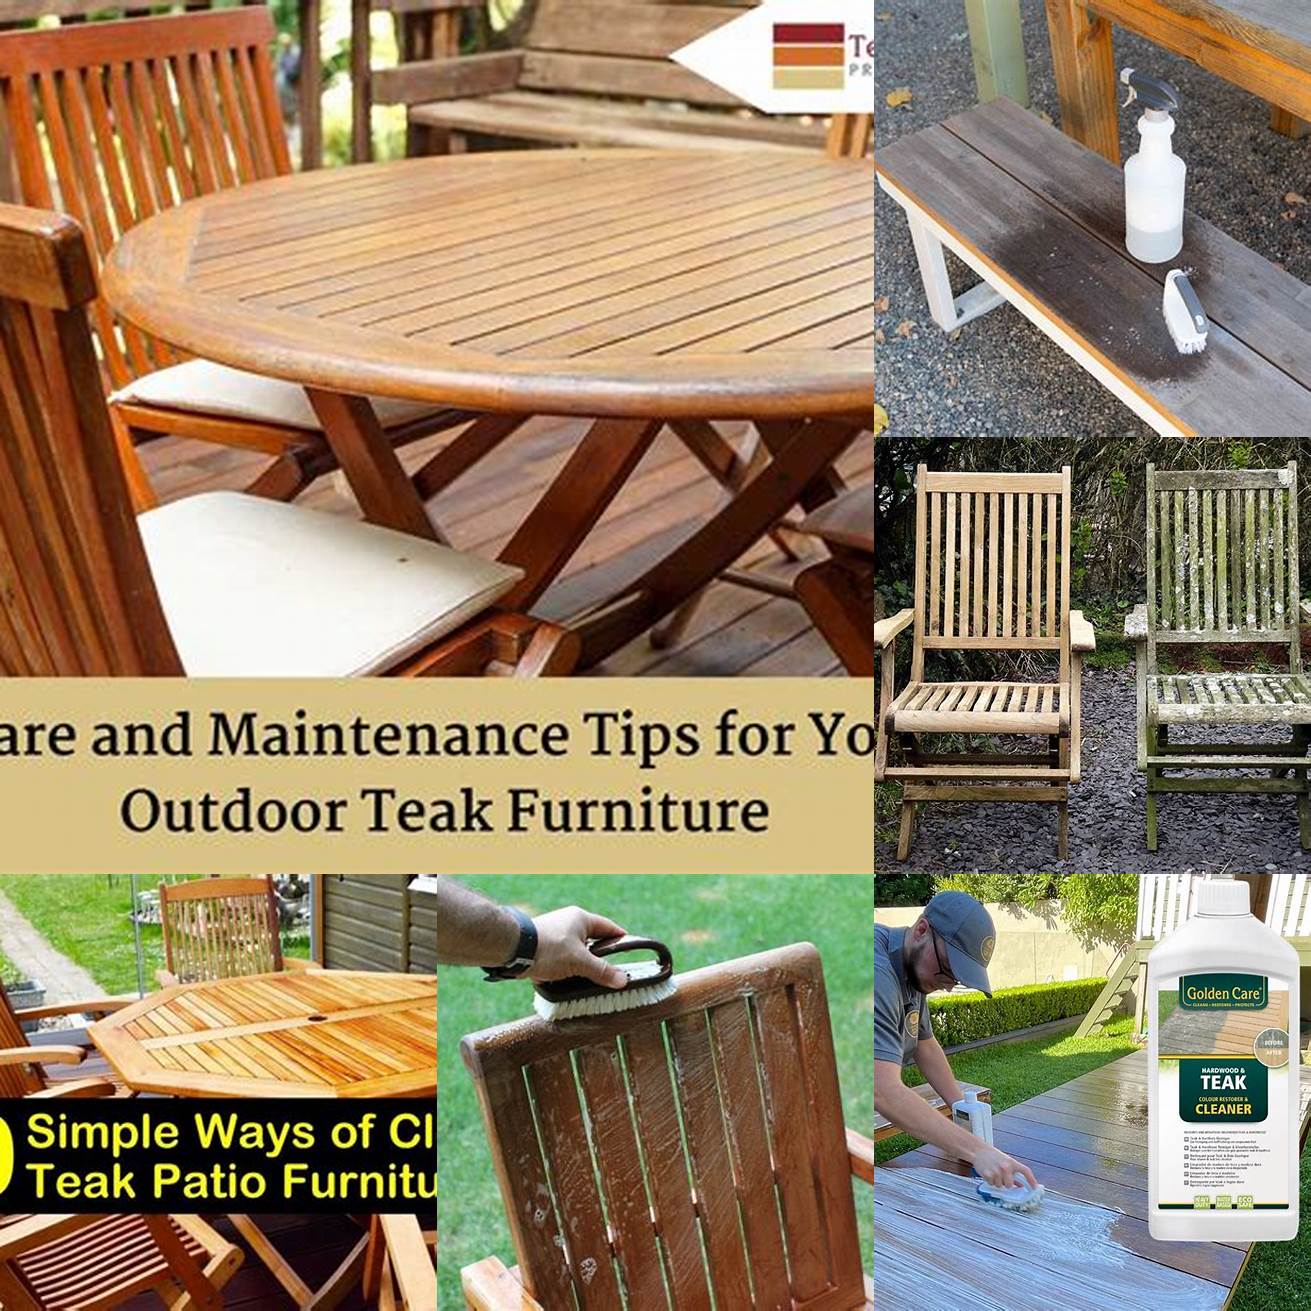 Tips on Cleaning Teak Furniture